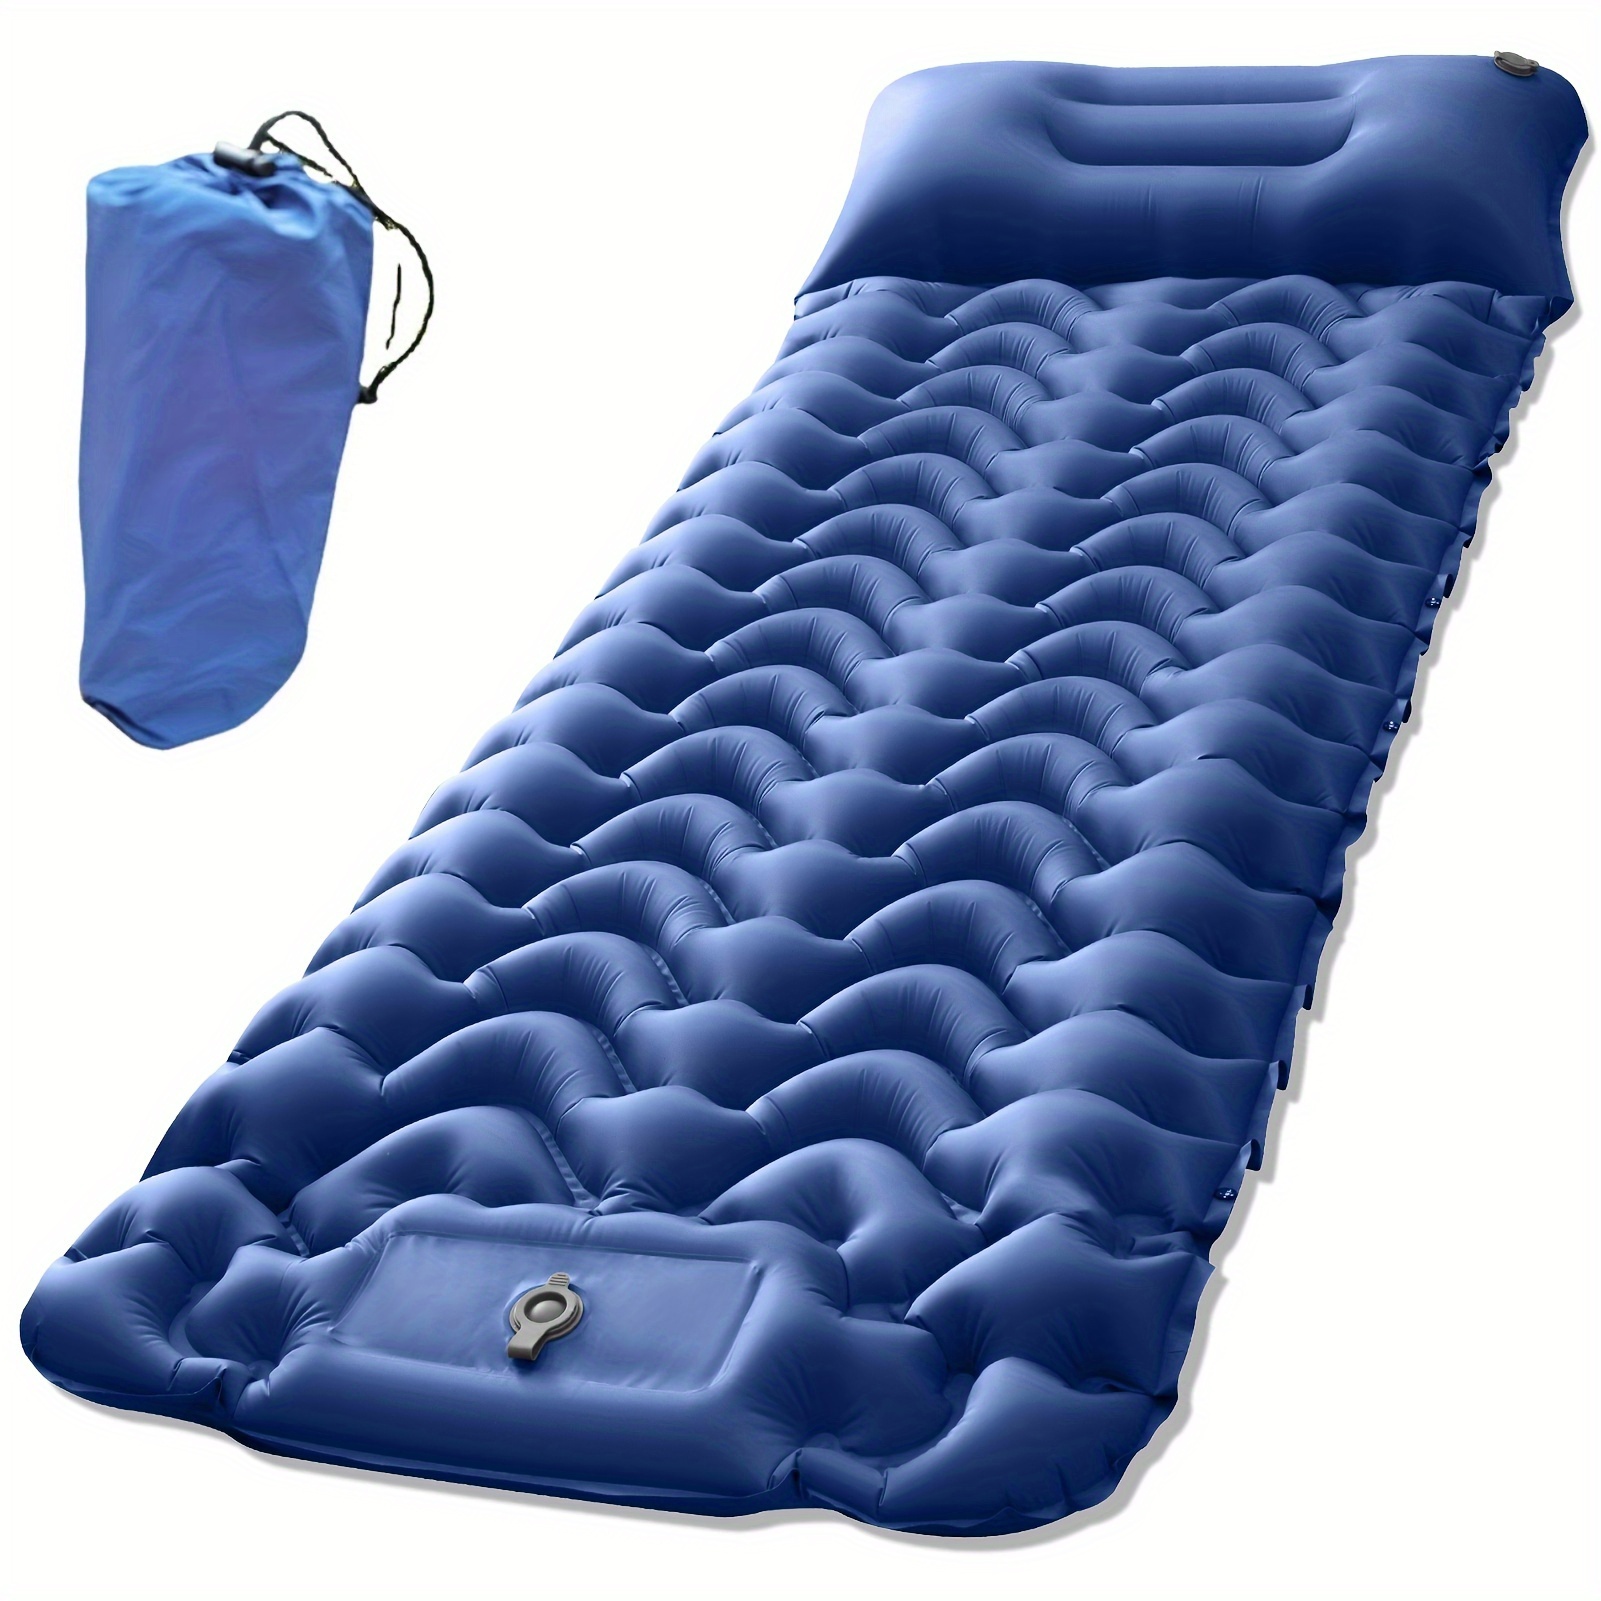 

Portable Inflatable Sleeping Mattress For Campers - Foot Step Design, Includes Storage Bag